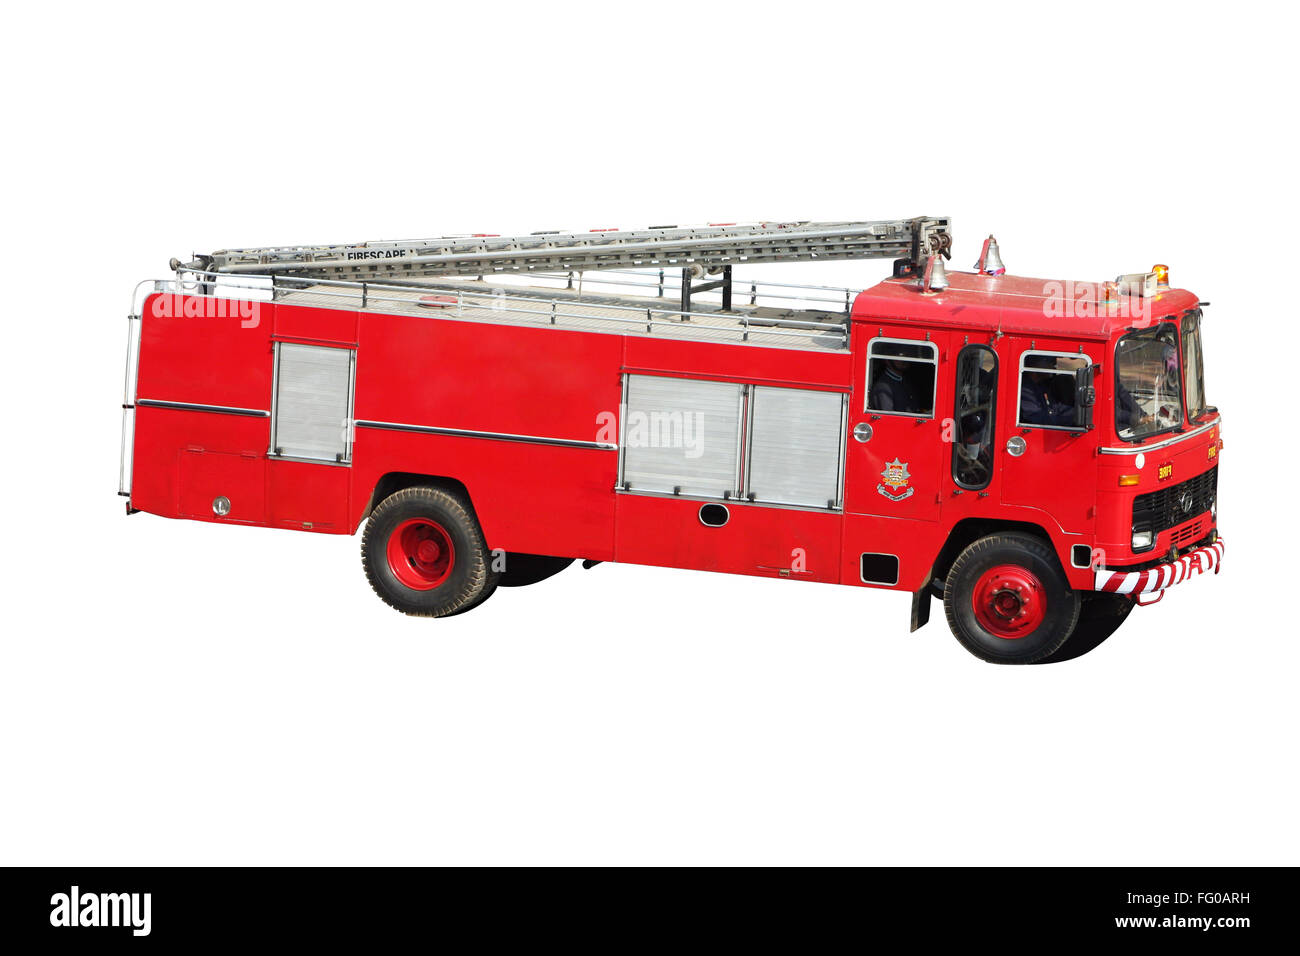 Fire brigade fire engine on white background Stock Photo